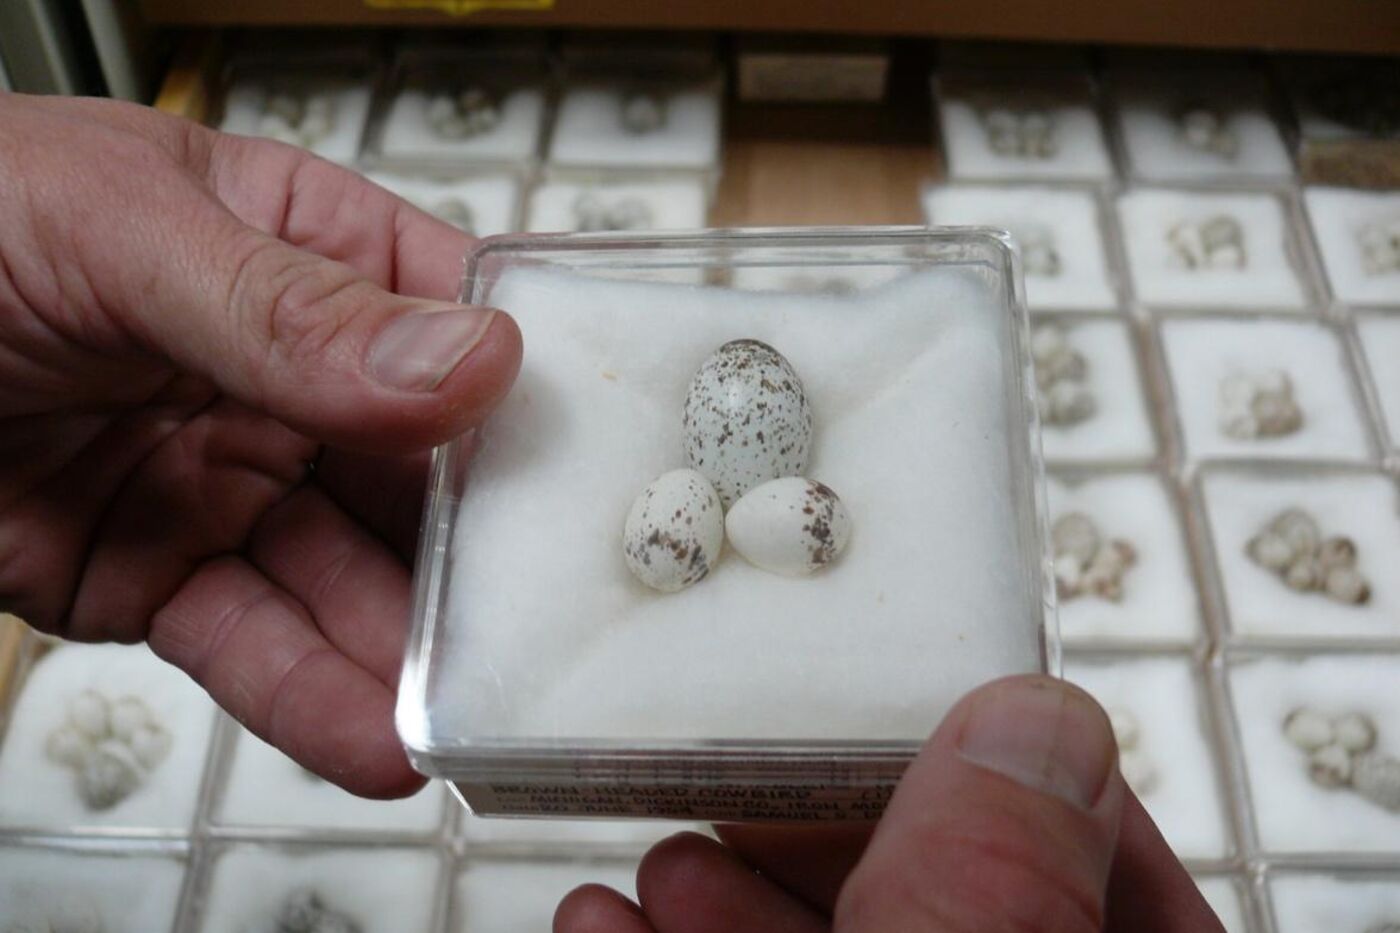 A pair of hands holding a small container with three small, speckled eggs on cotton bedding. Many other similar containers are visible in the background.